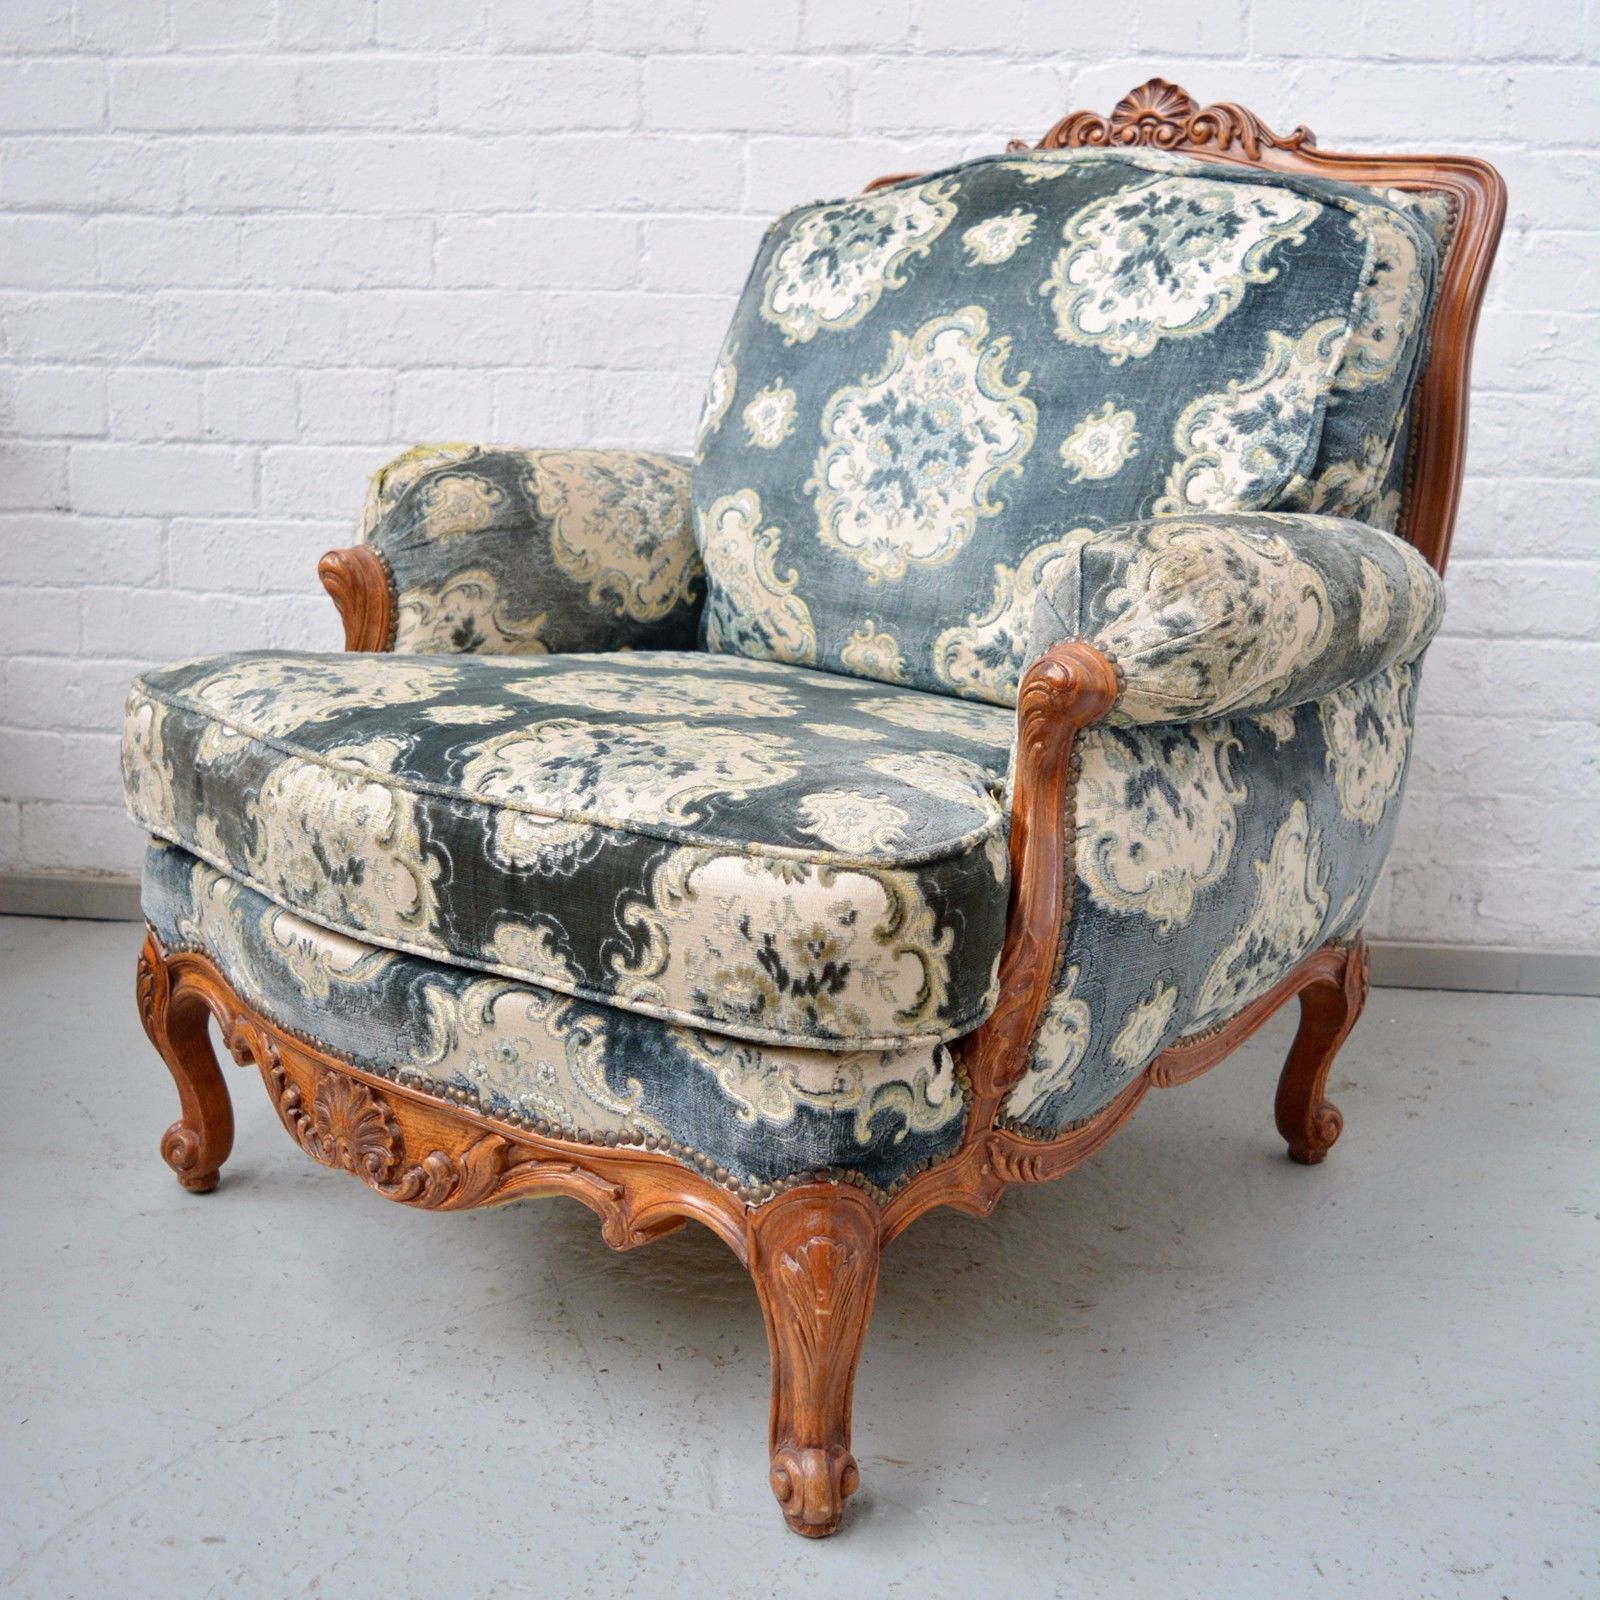 Large French Bergere Louis style Lounge chair / armchair